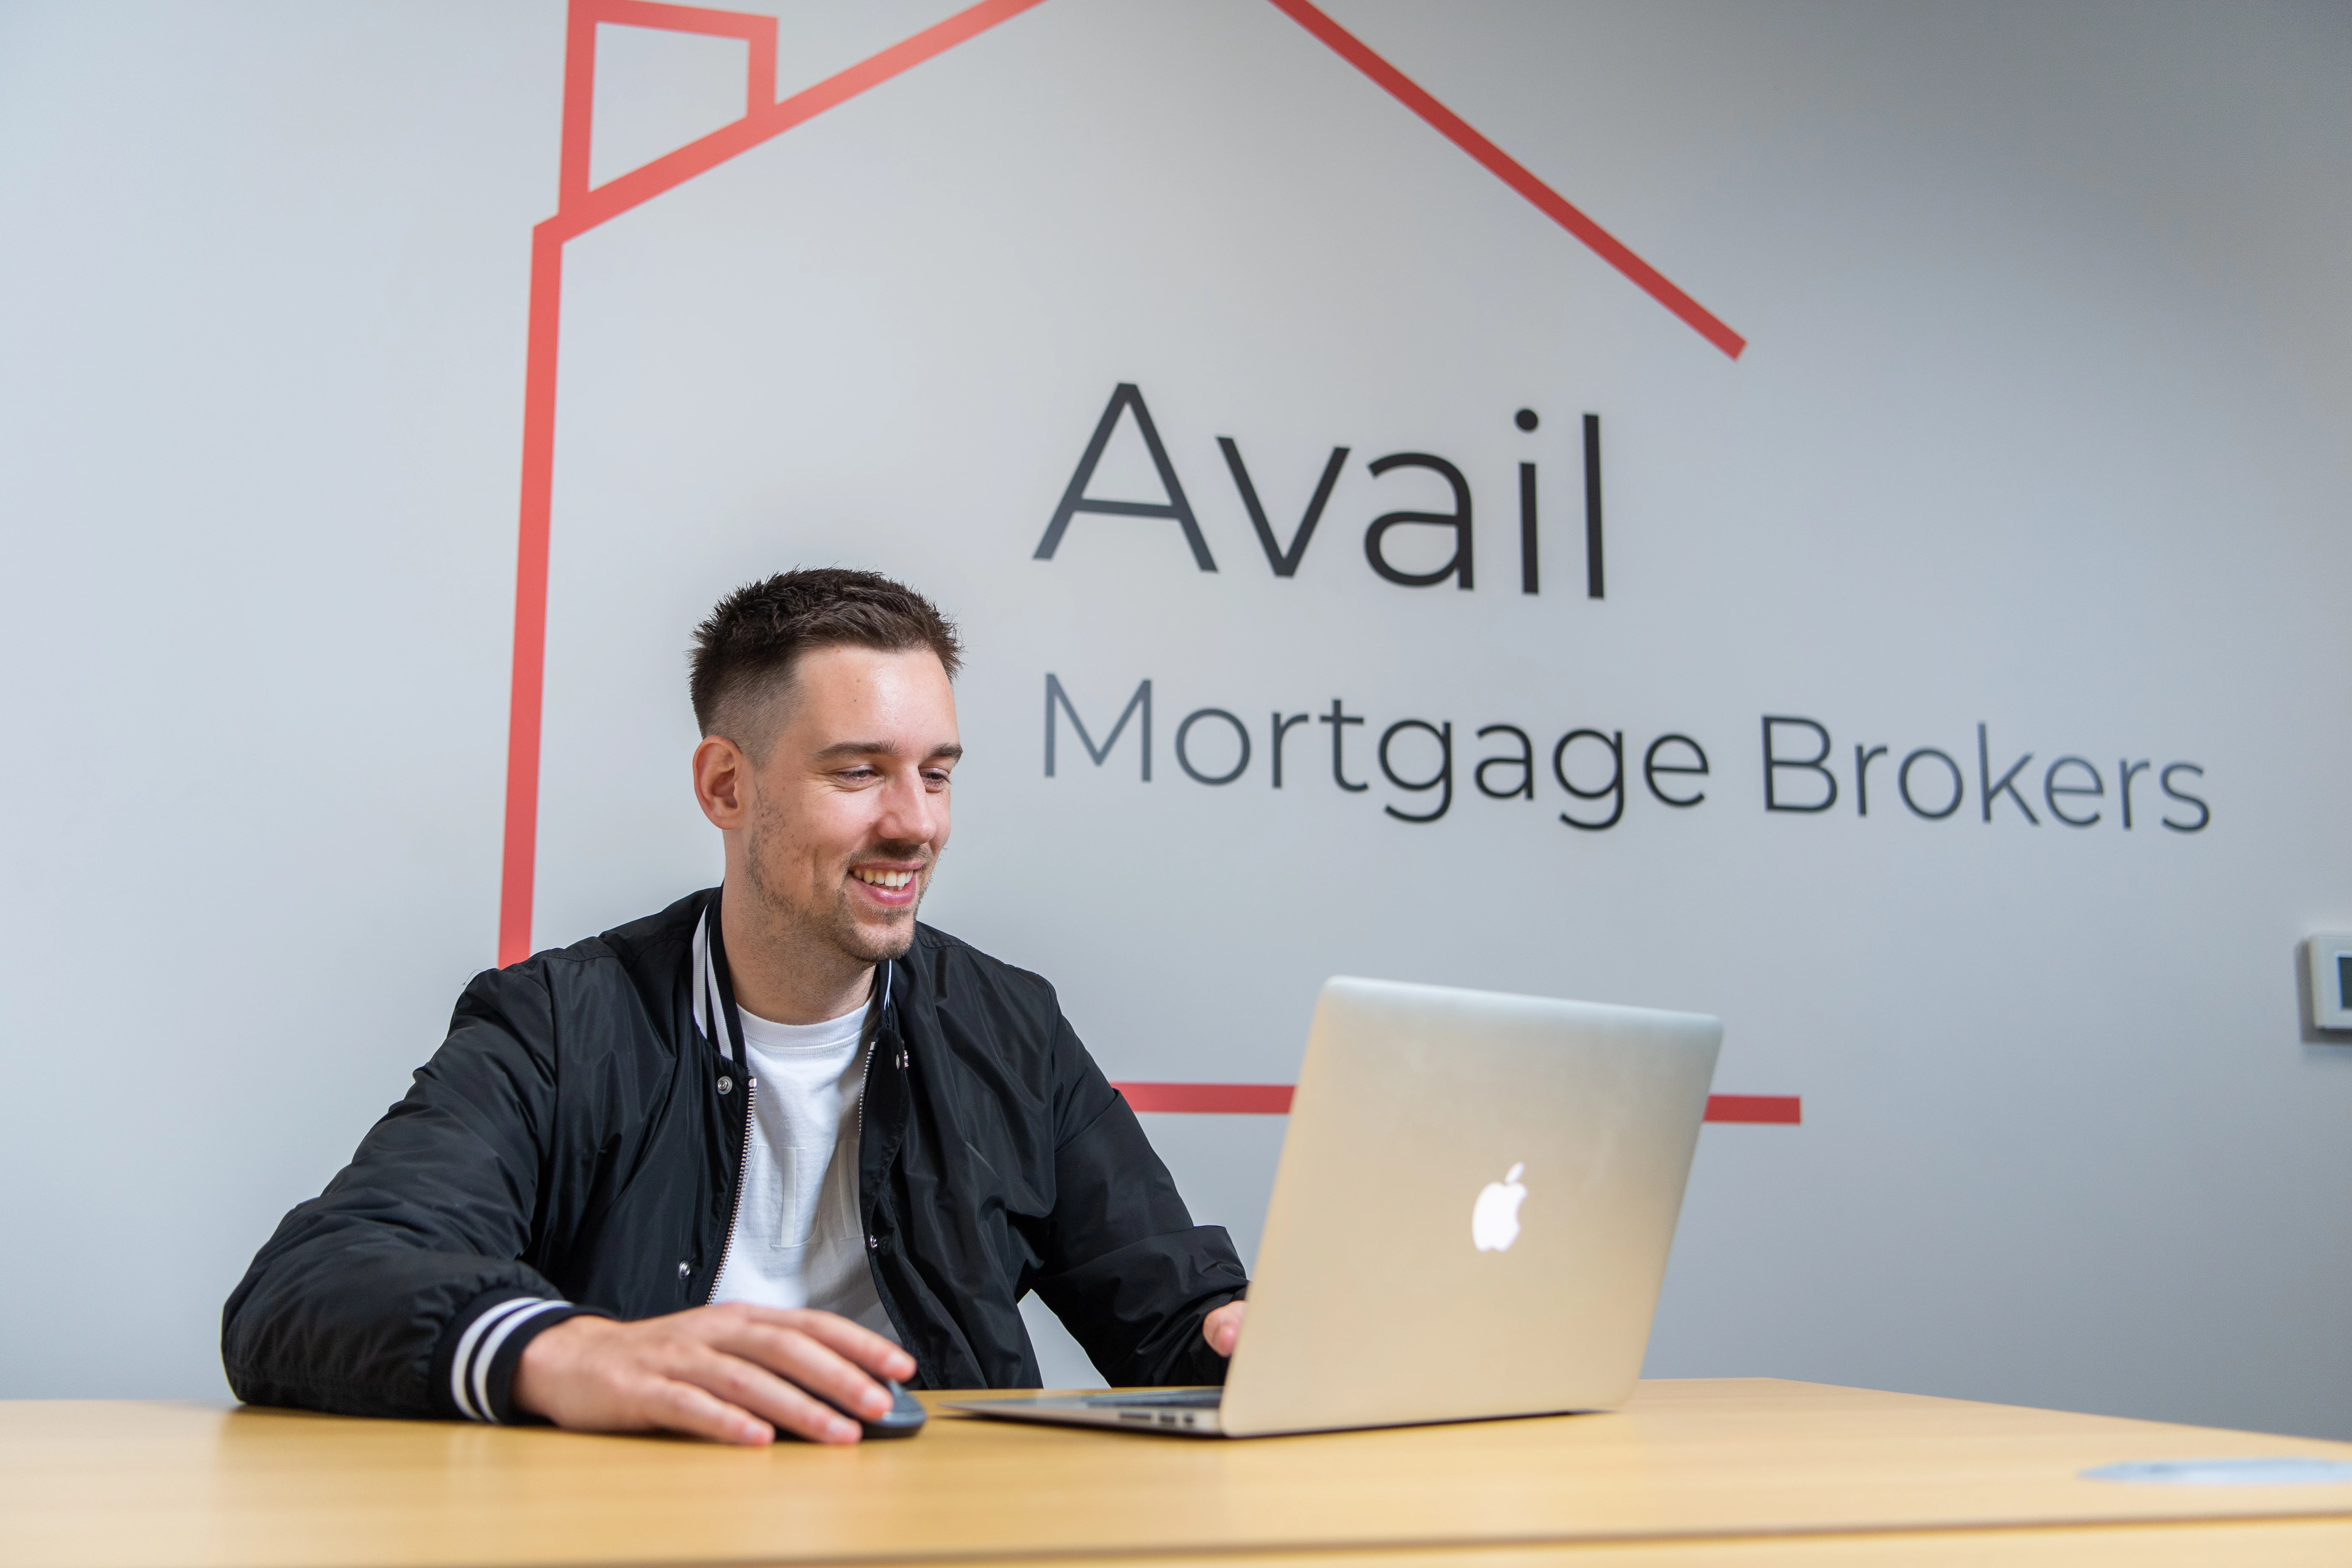 Jamie Megson, director of Avail Mortgage Brokers